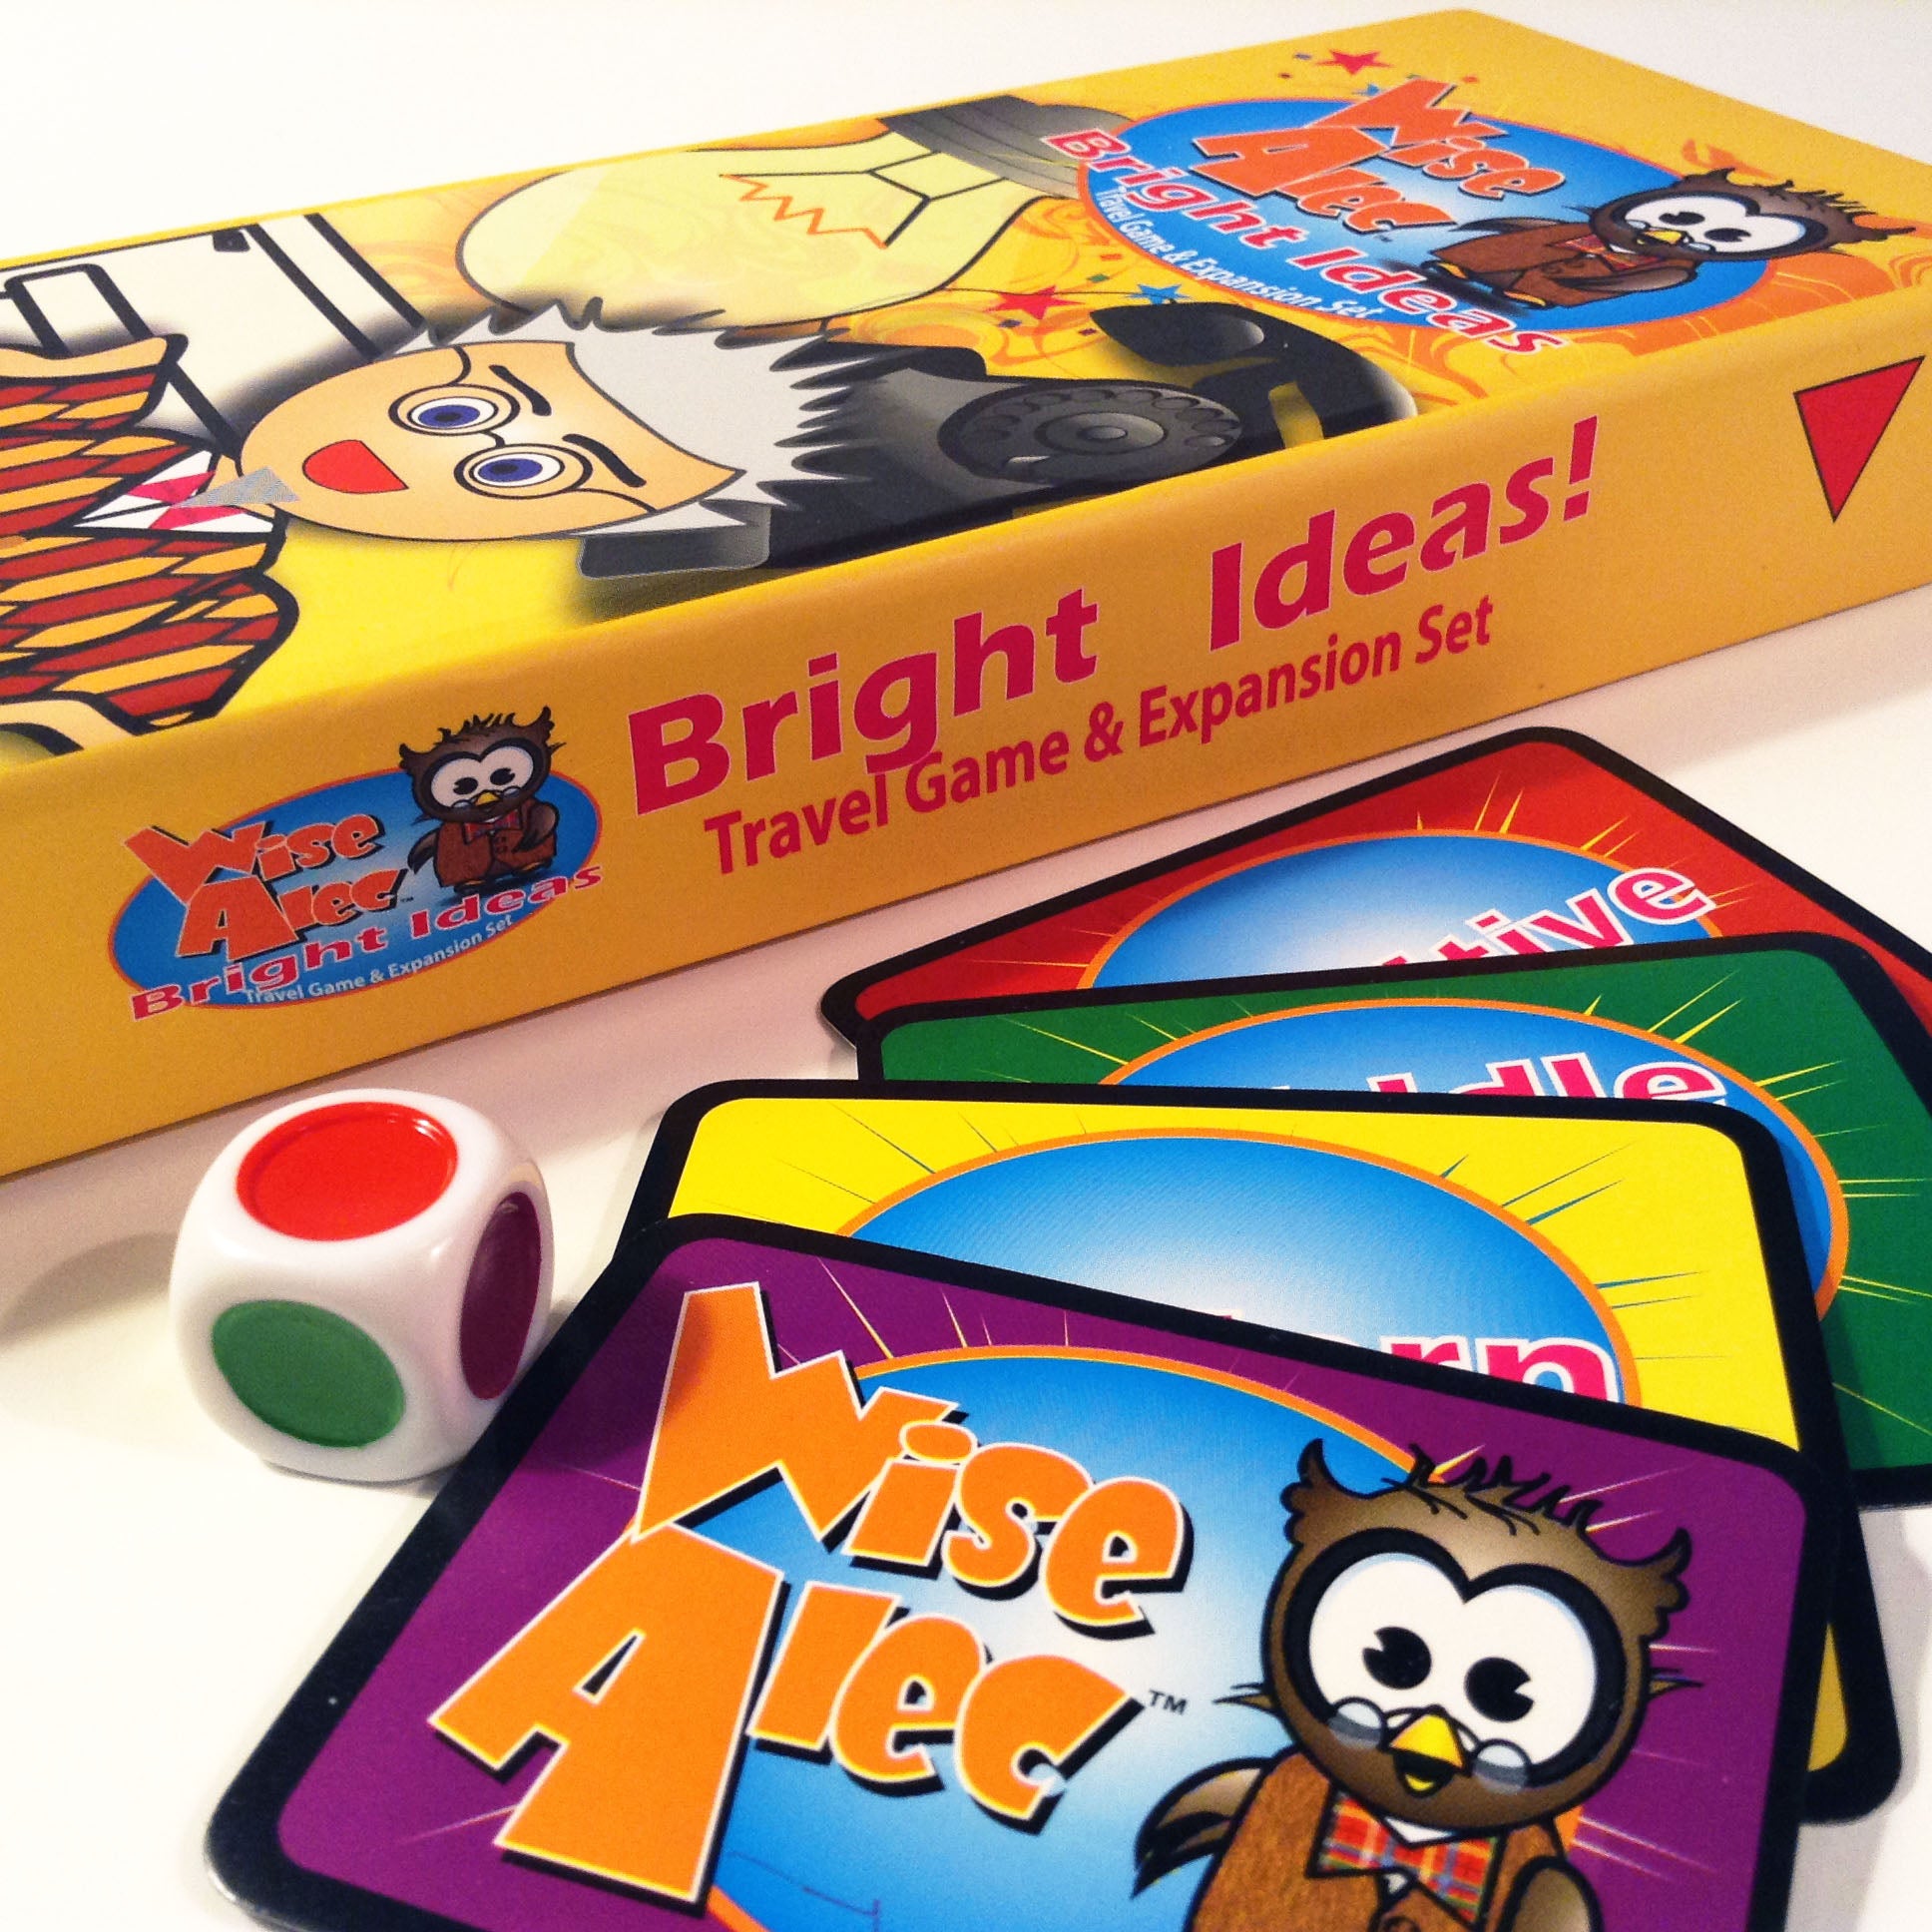 Wise Alec Bright Ideas STEM Board Game Expansion & Travel Set